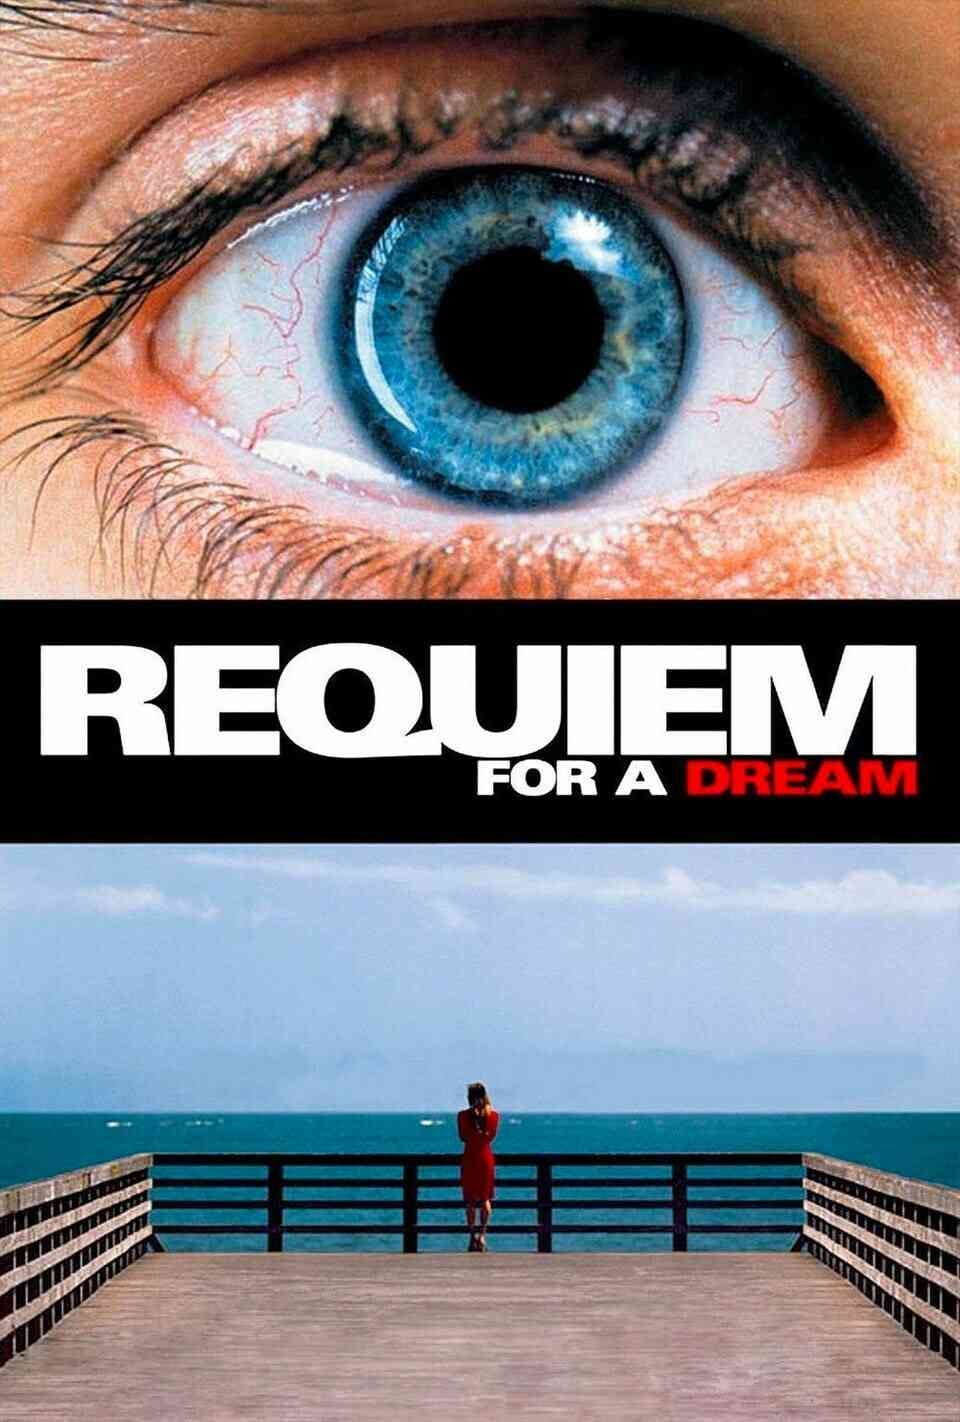 Read Requiem for a Dream screenplay (poster)